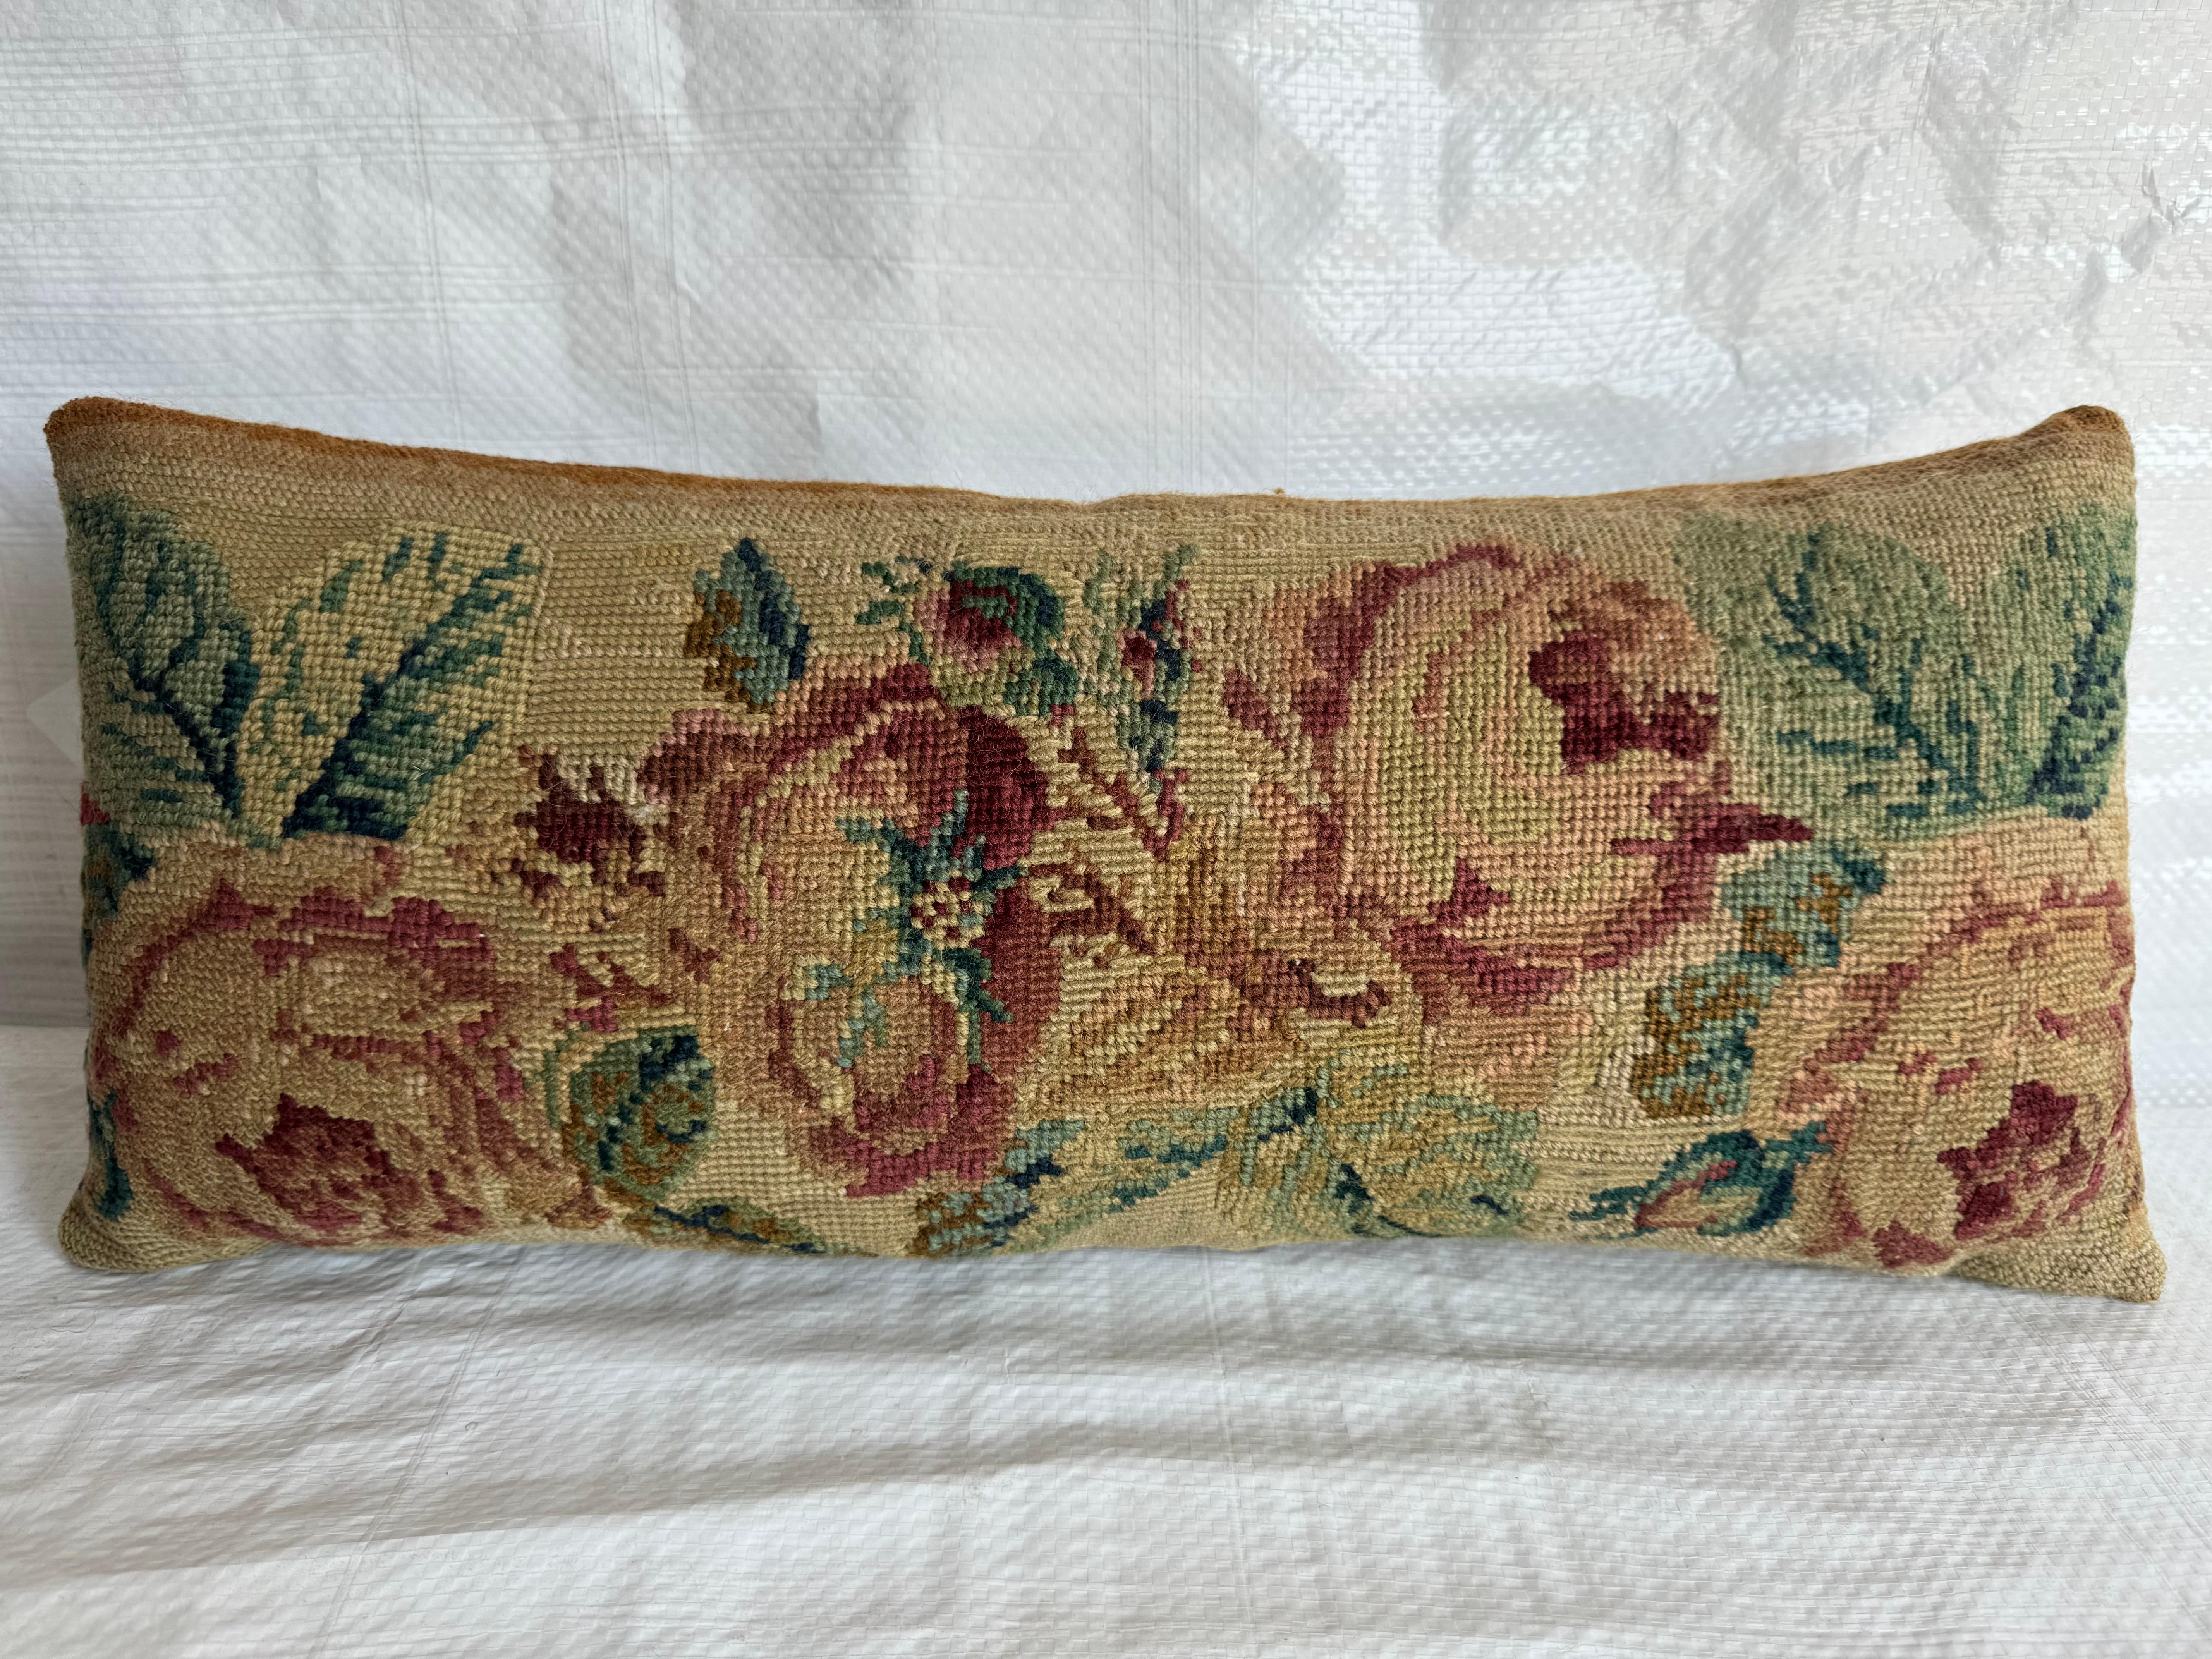 Indulge in the regal charm of the past with our stunning 1850 English Needlework Pillow, measuring 20